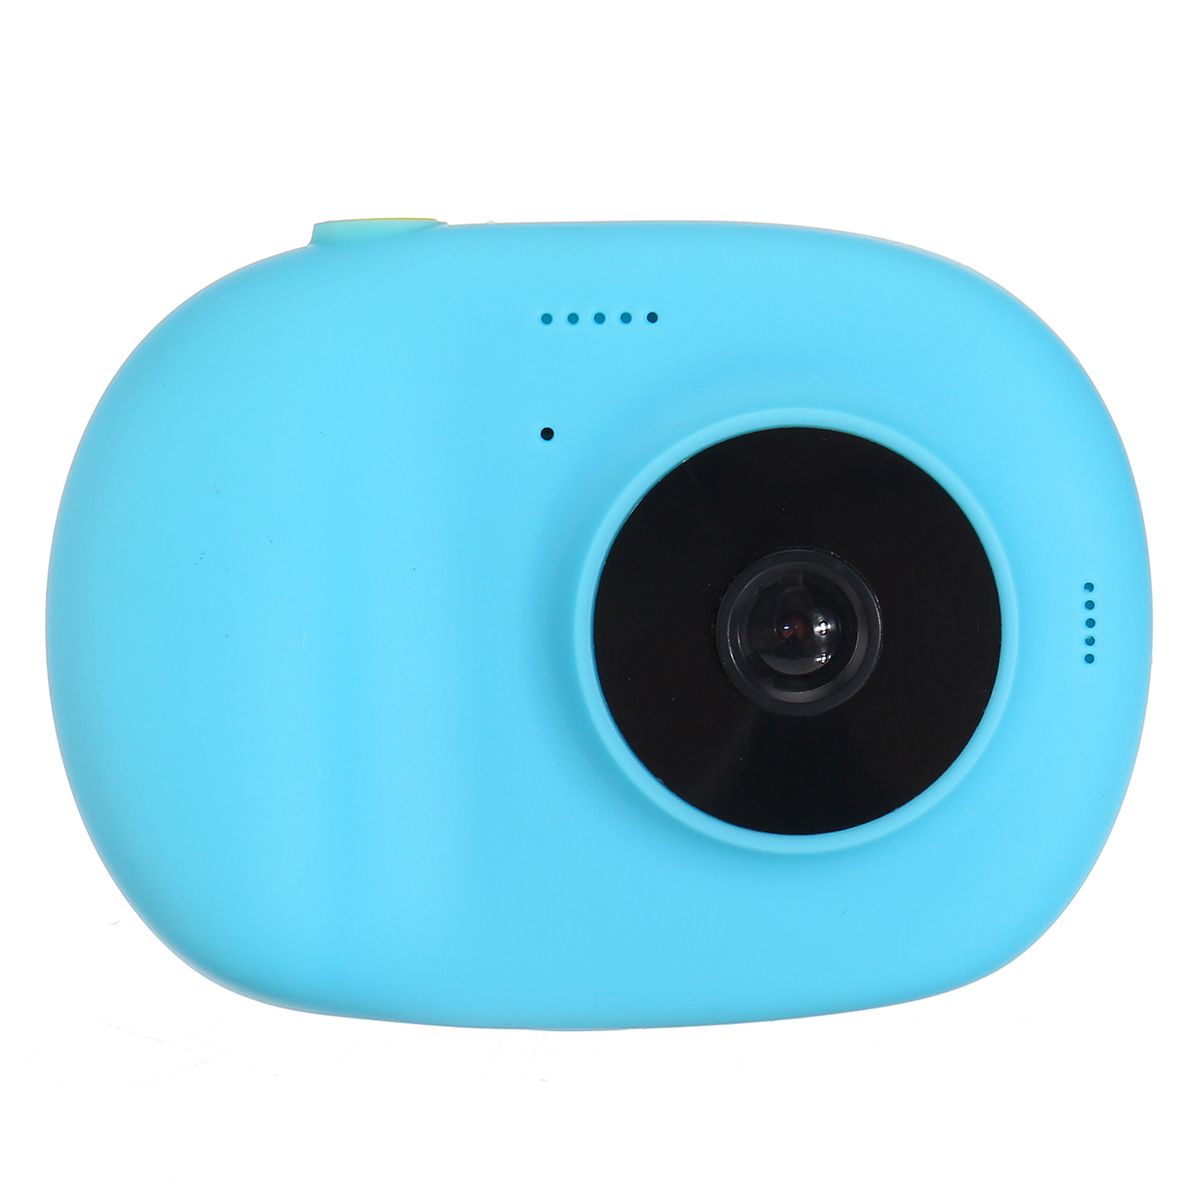 HD-Children-Mini-Digital-Camera-Kids-Toys-Camcorder-Gift-Toddler-Video-Recorder-with-Dual-Lens-1627471